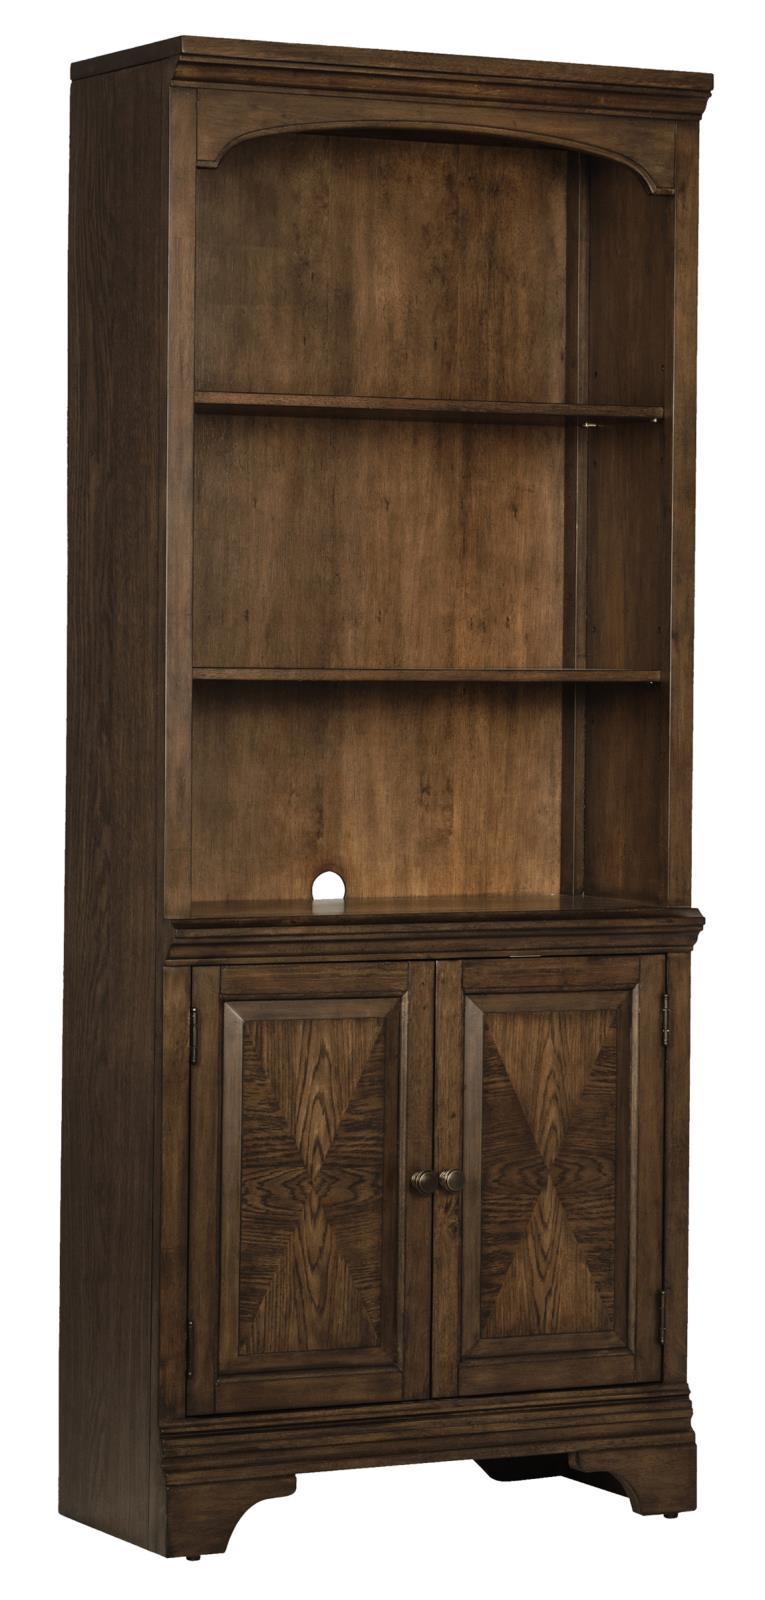 Hartshill Bookcase with Cabinet Burnished Oak  Las Vegas Furniture Stores